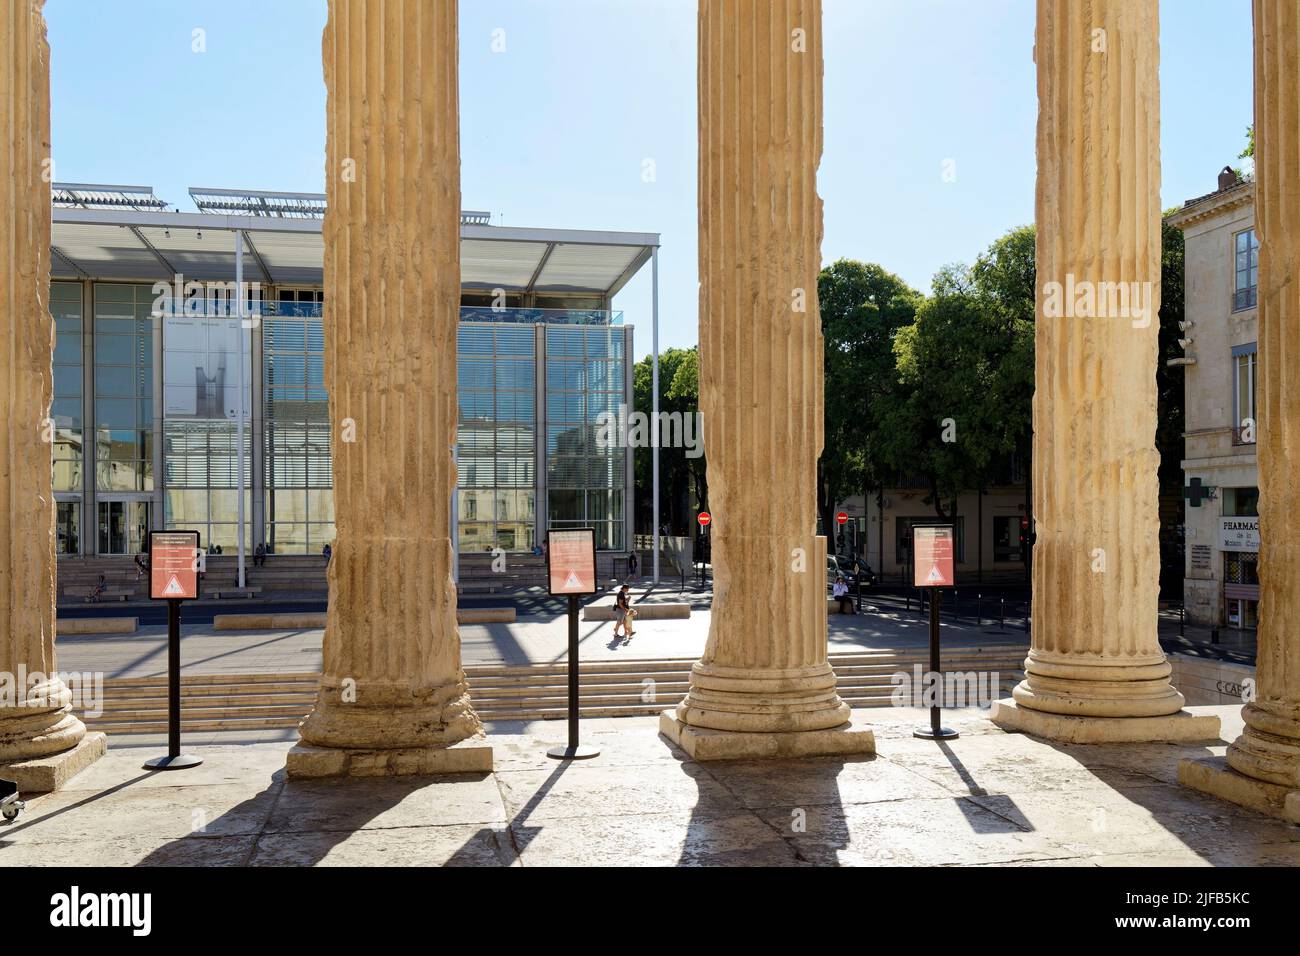 France, Gard, Nimes, Maison Carree, old Roman Temple of the 1st century BC, Contemporary Art museum and Le Carre d'Art by architect Norman Forster, Multimedia Library and Contemporary Art Centre Stock Photo